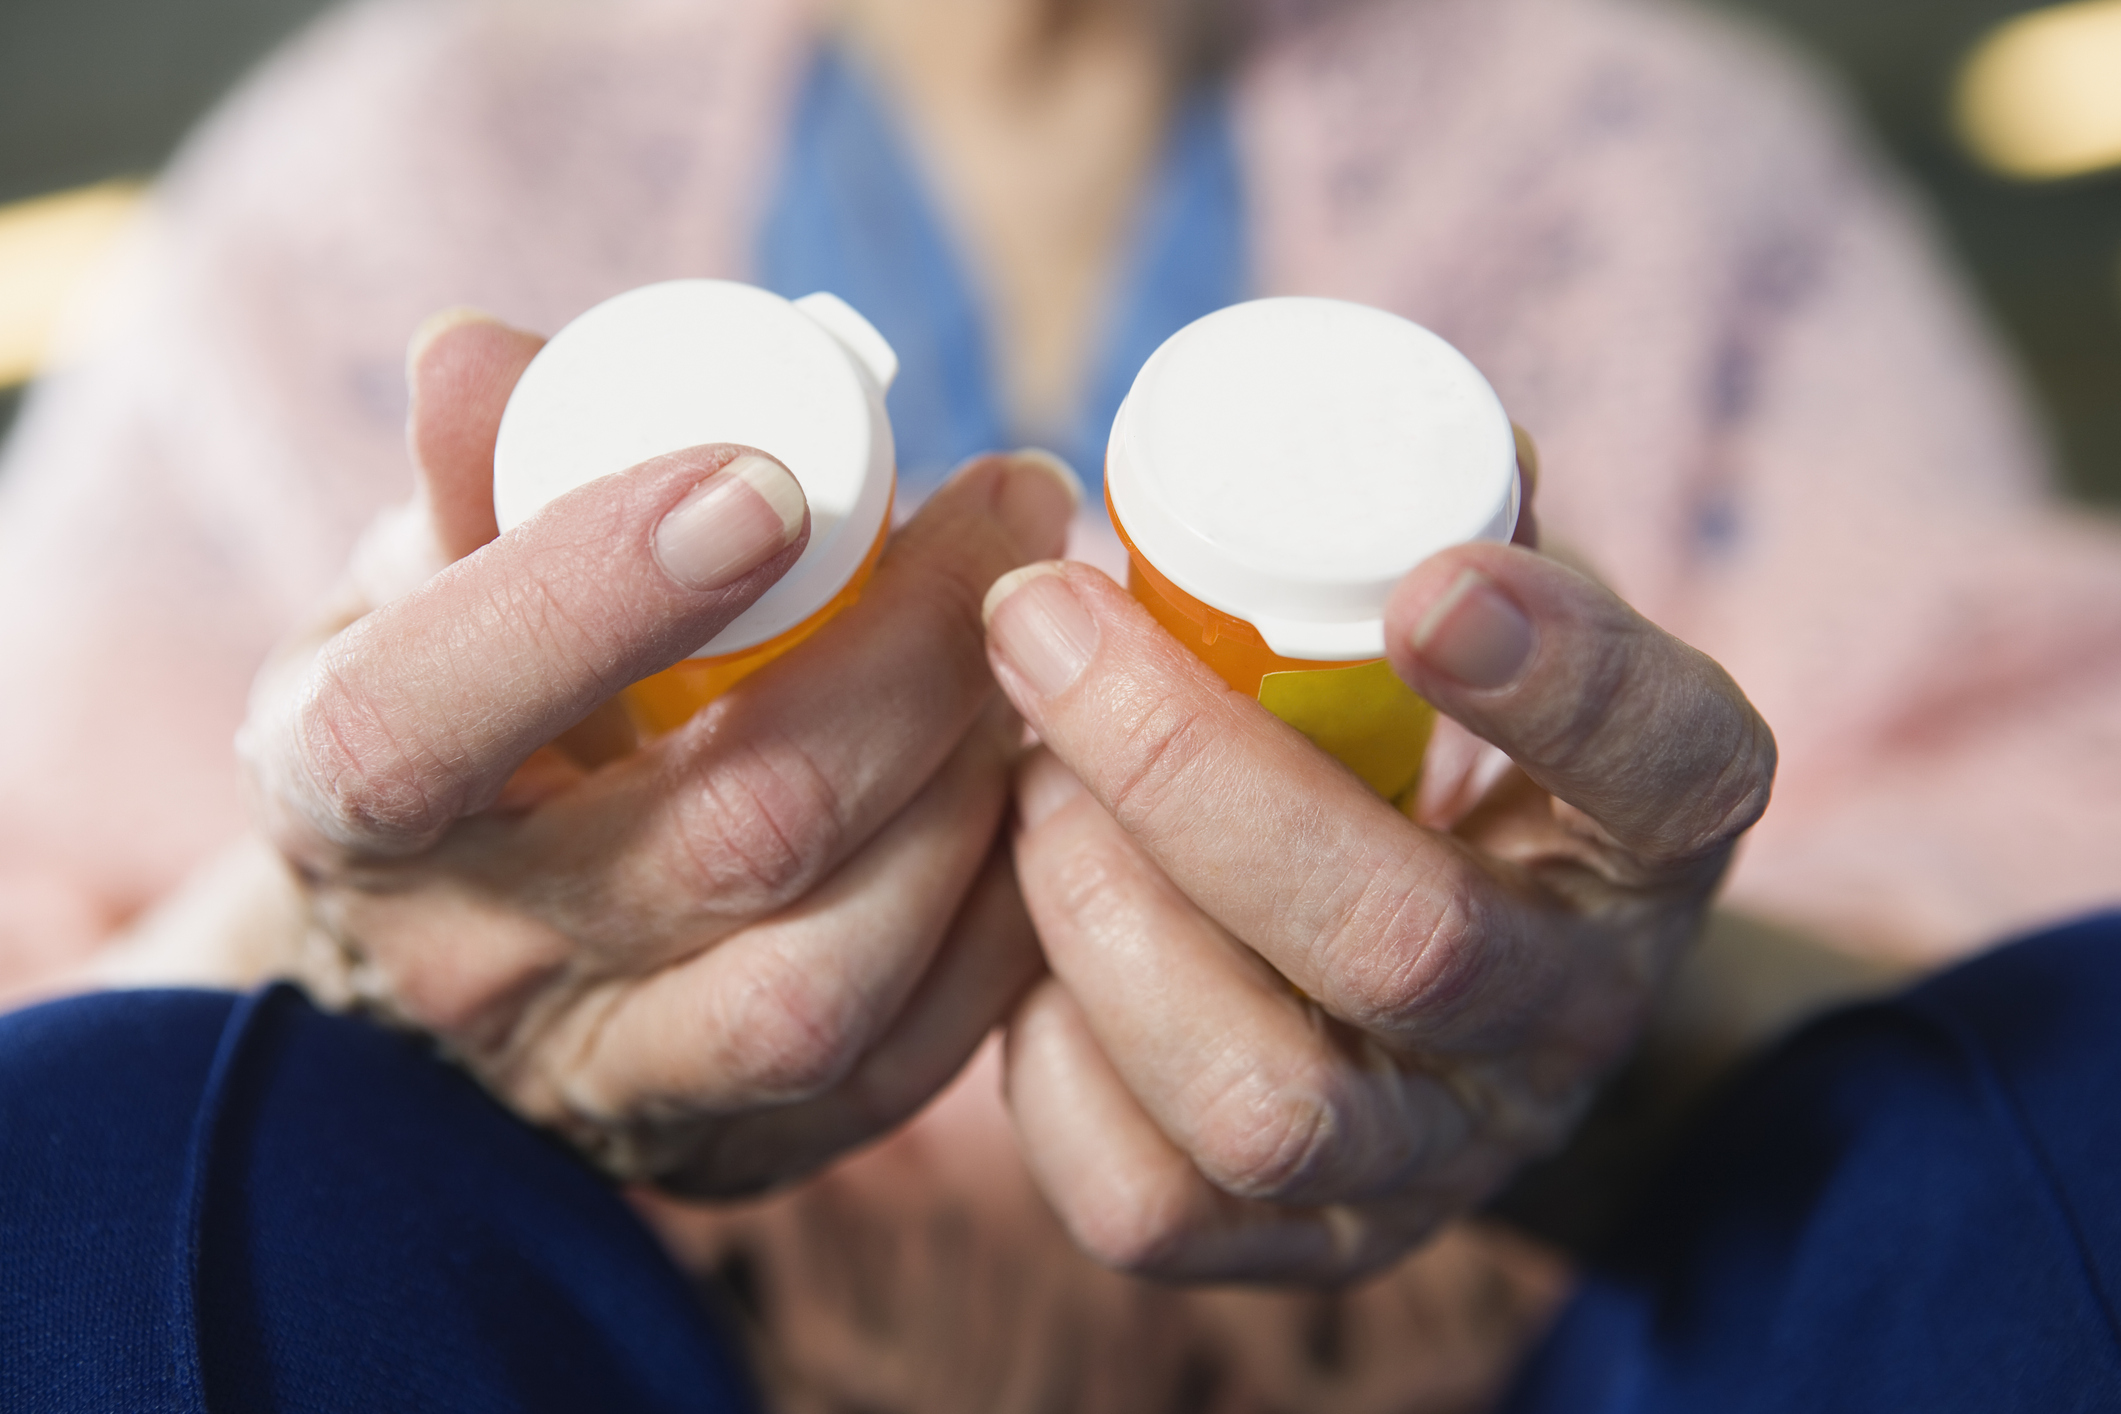 Woman holding two pill bottles